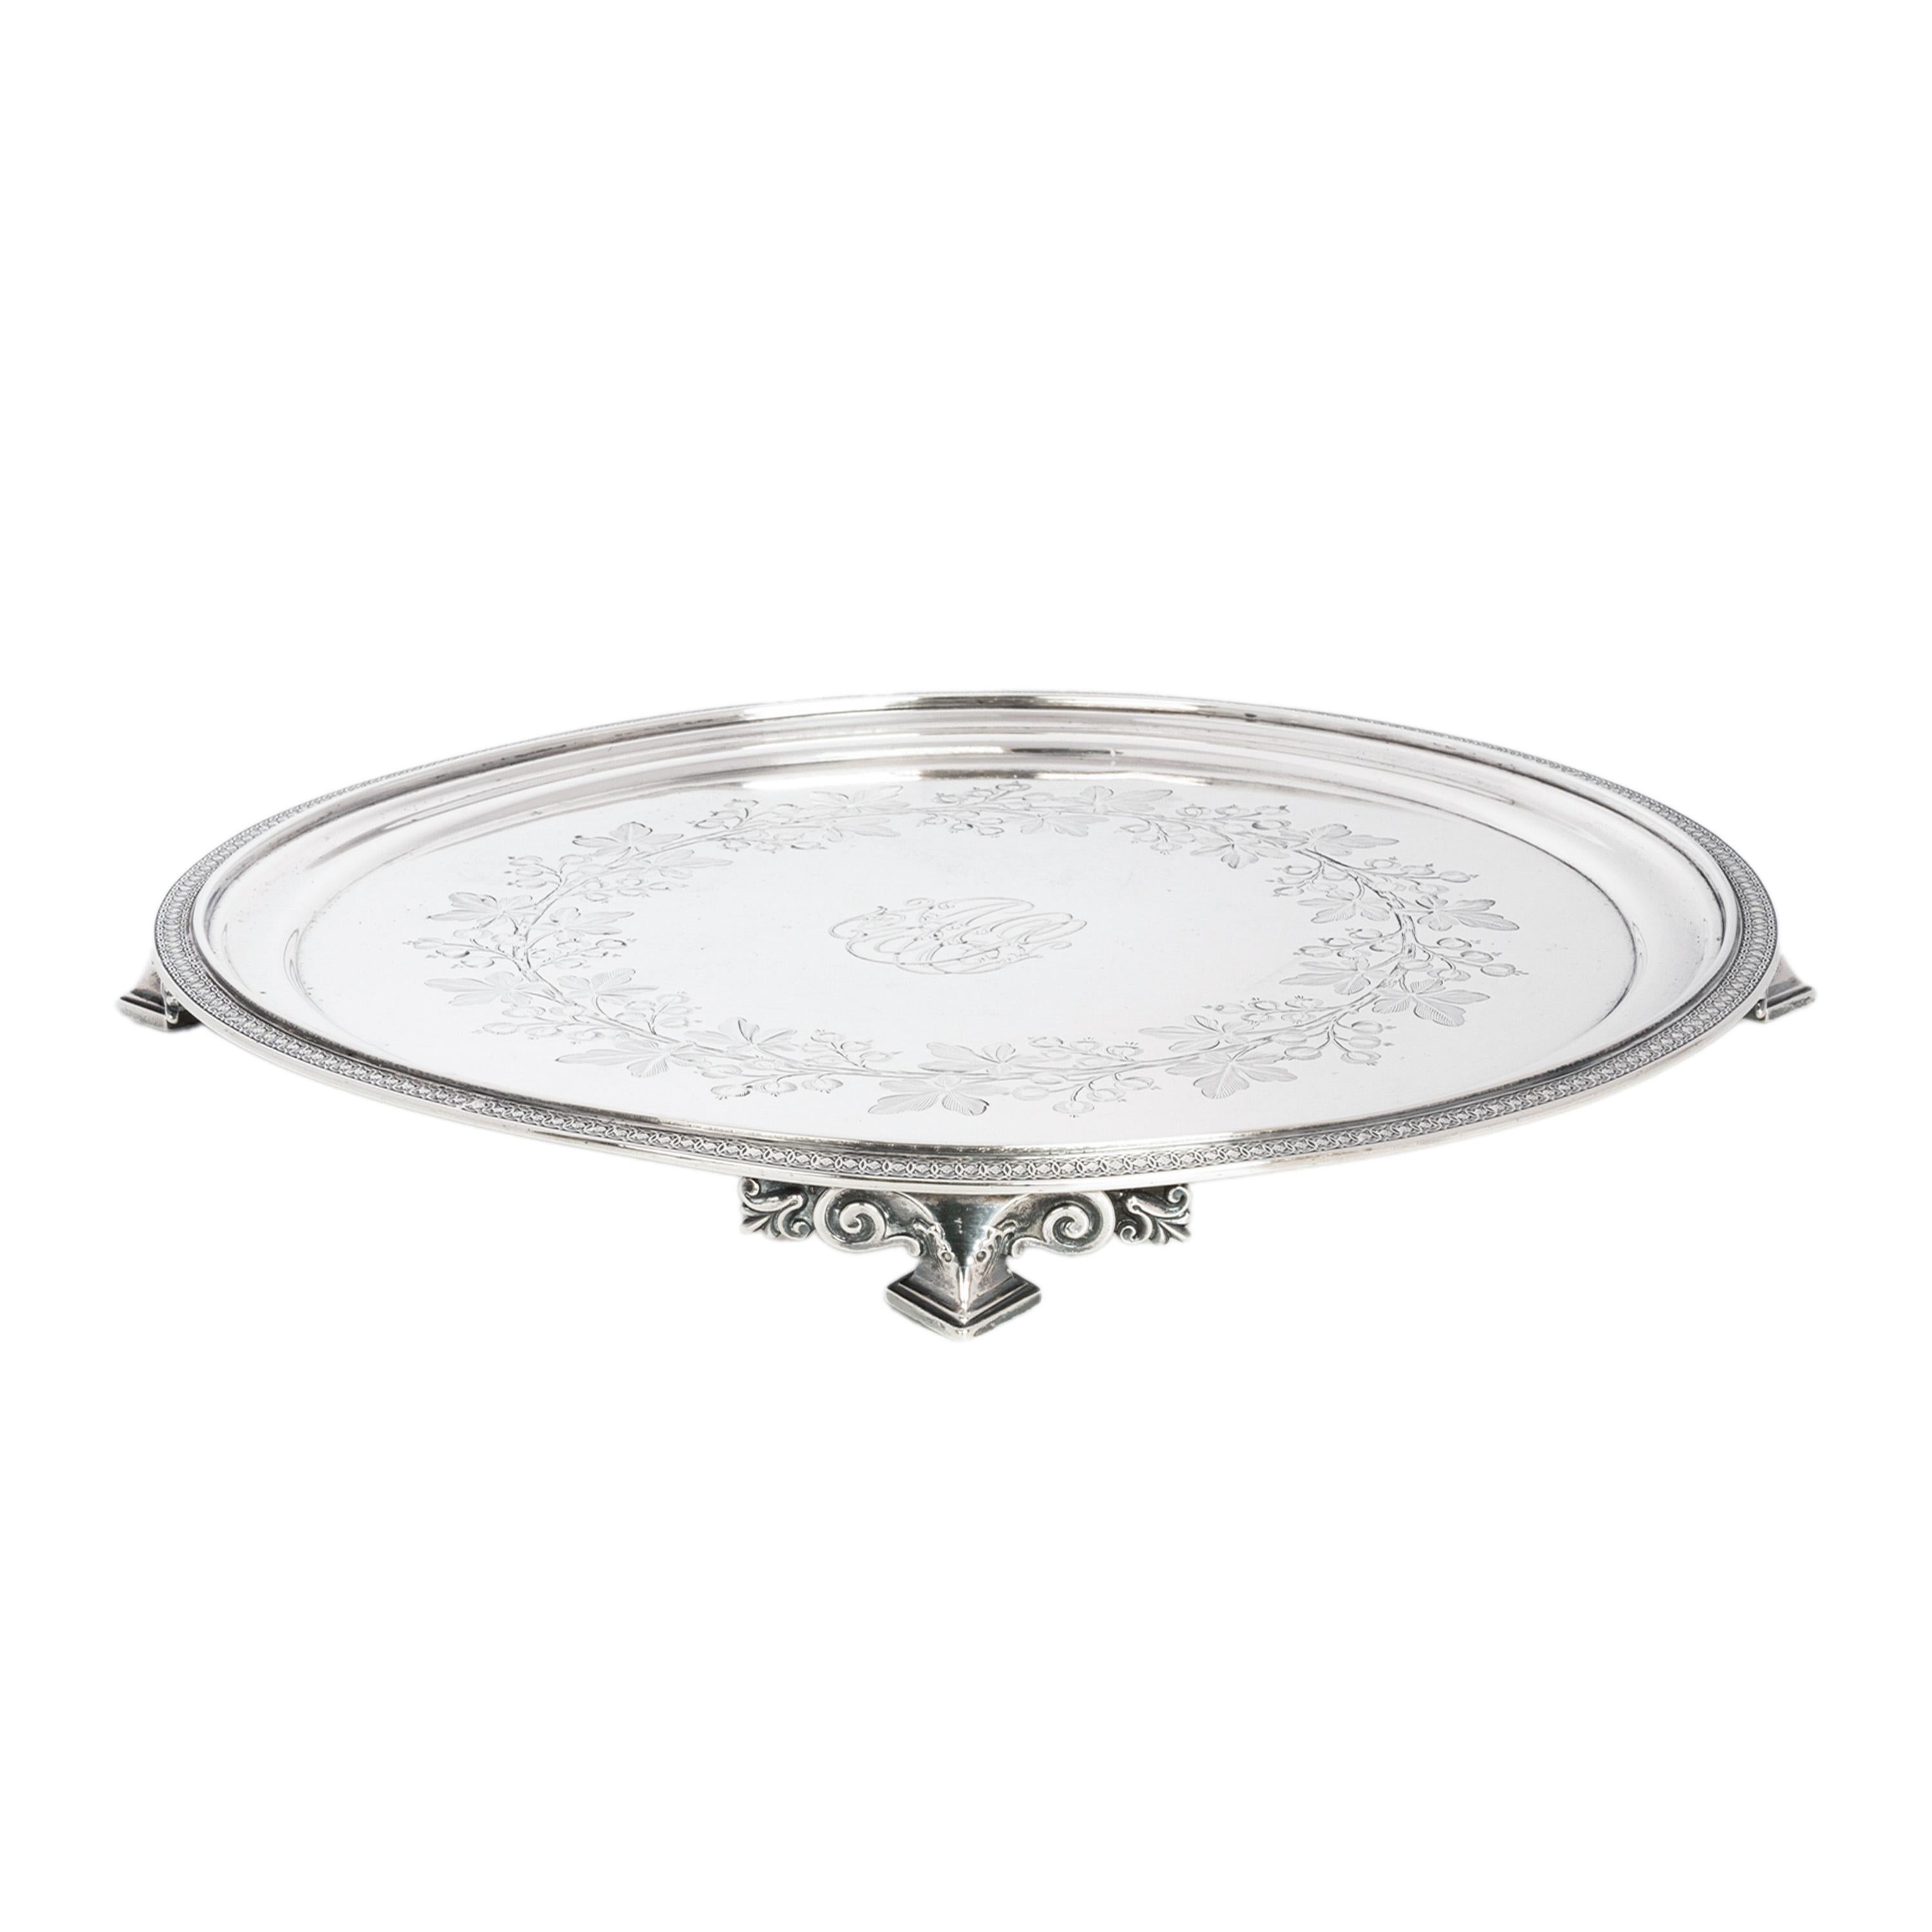 Aesthetic Movement Antique Engraved Sterling Silver Tiffany & Co Footed Salver Tray New York 1870 For Sale